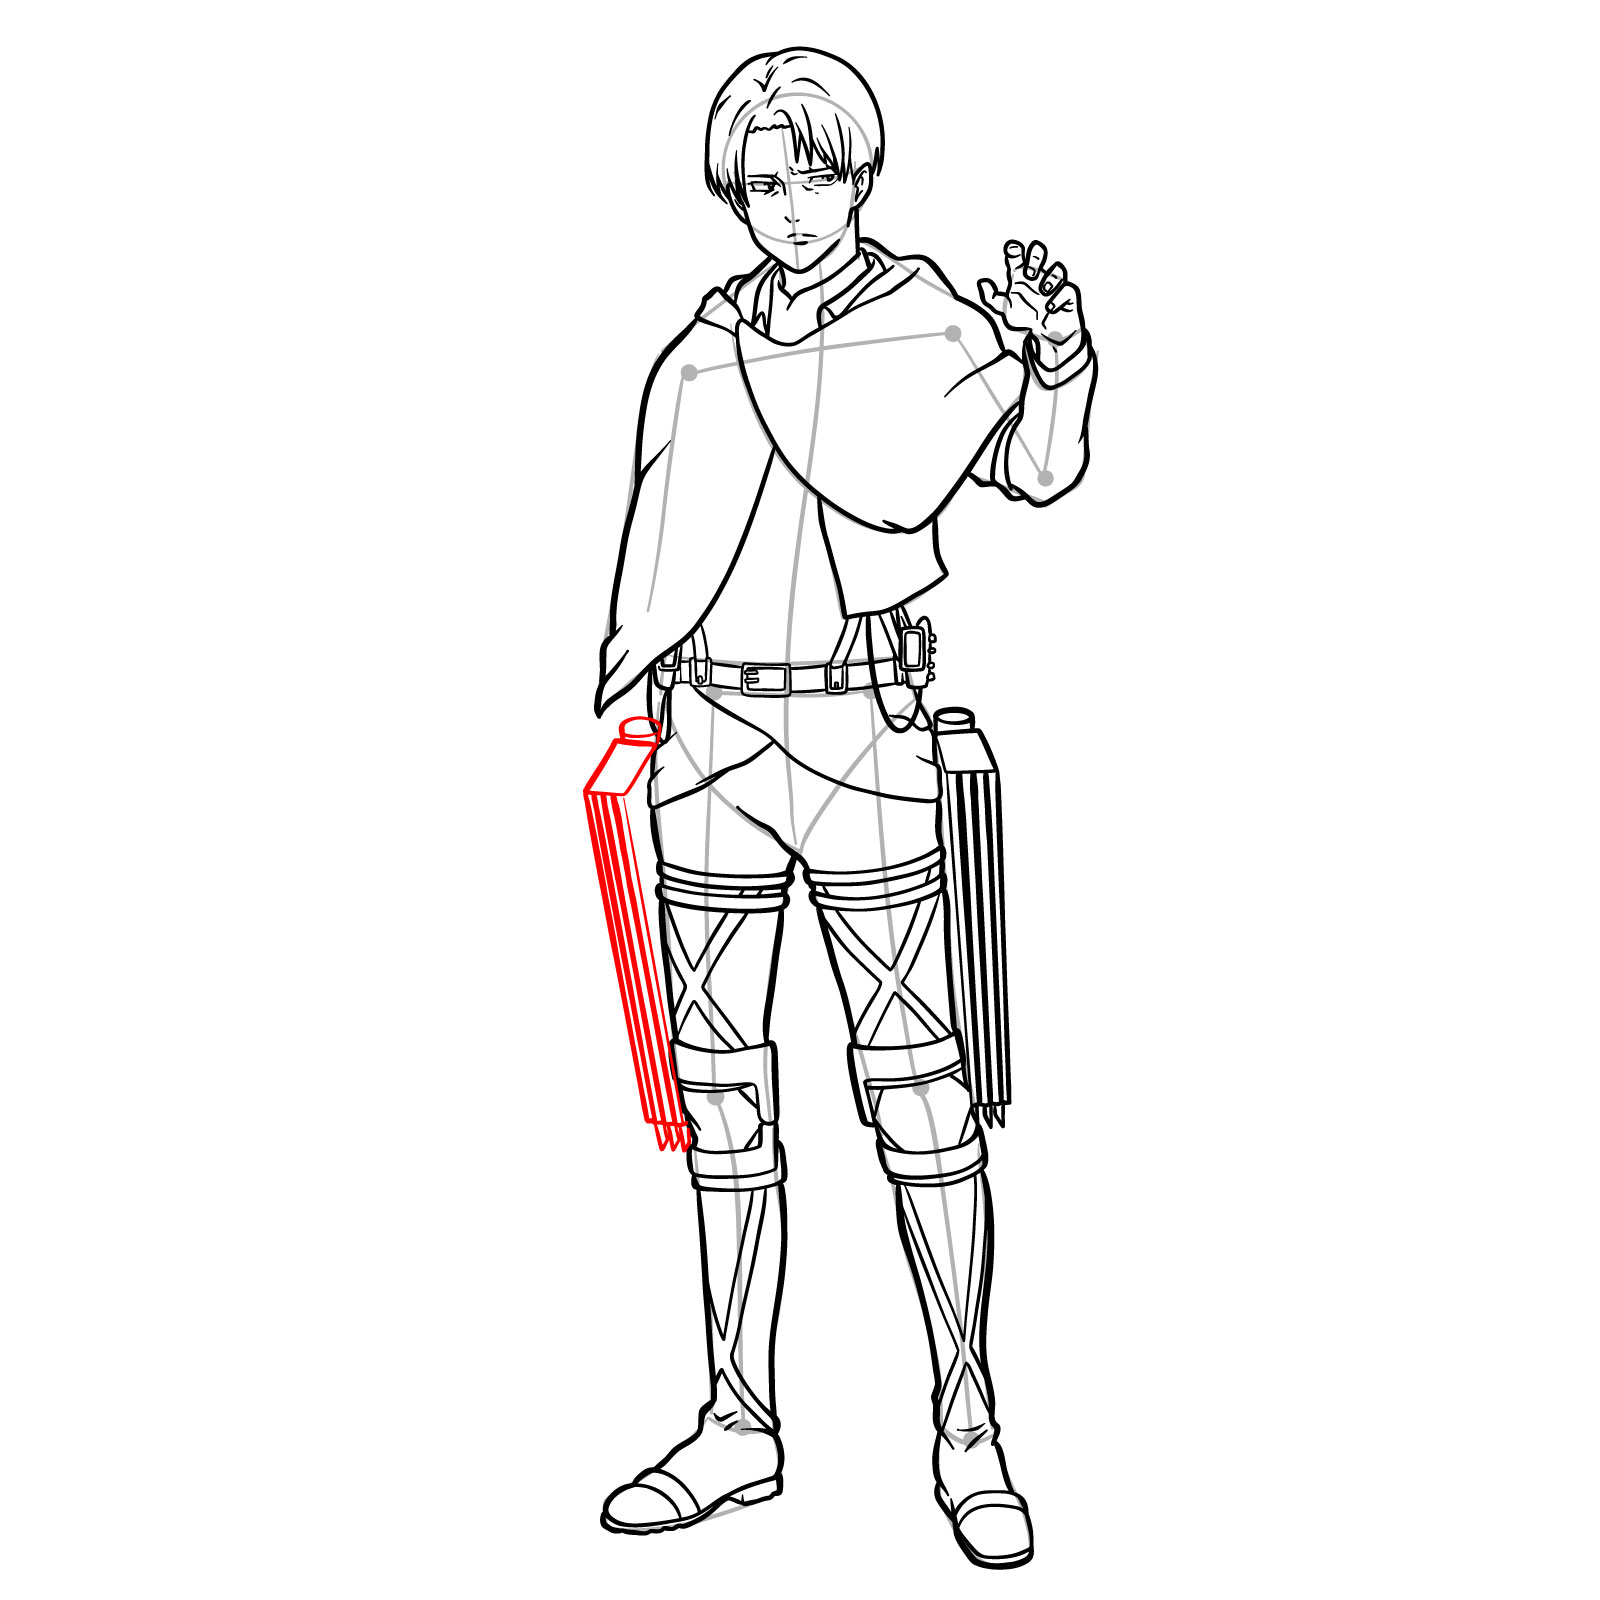 Drawing guide for adding the second ODM gear to Levi Ackerman's full body portrait - step 26